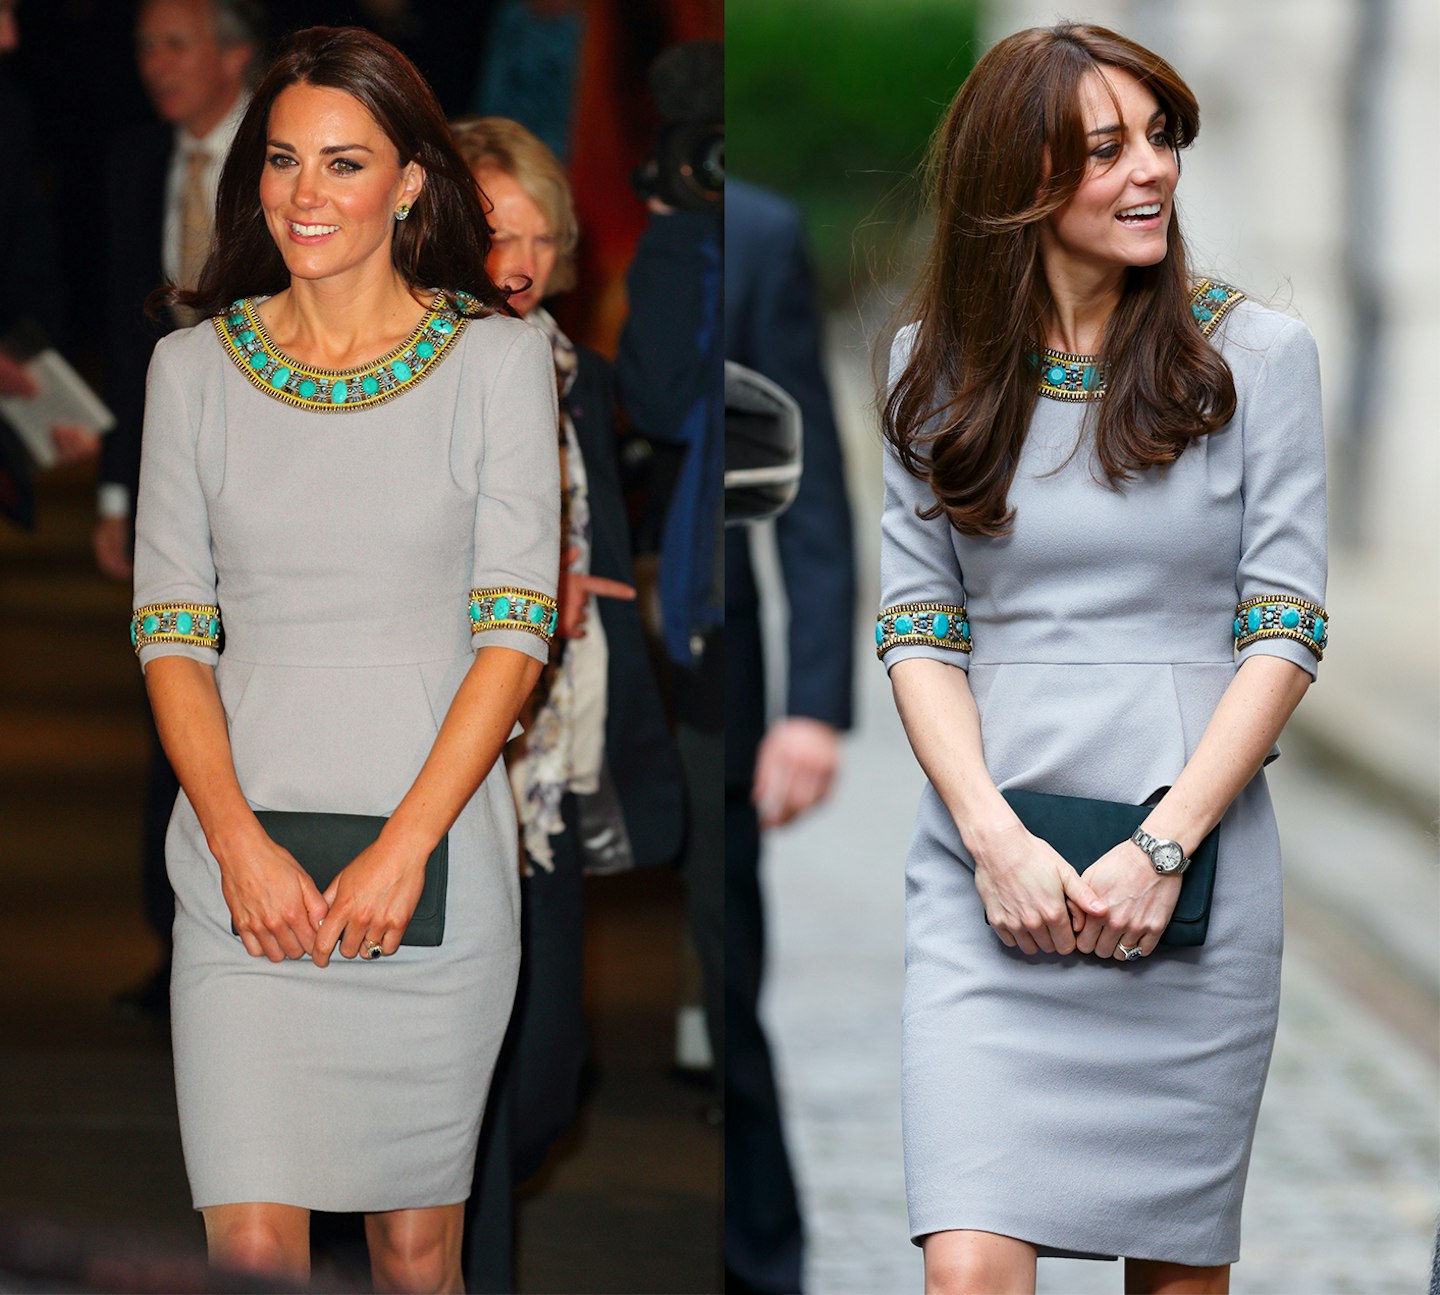 Kate Middleton fans are convinced she keeps wearing her Gucci